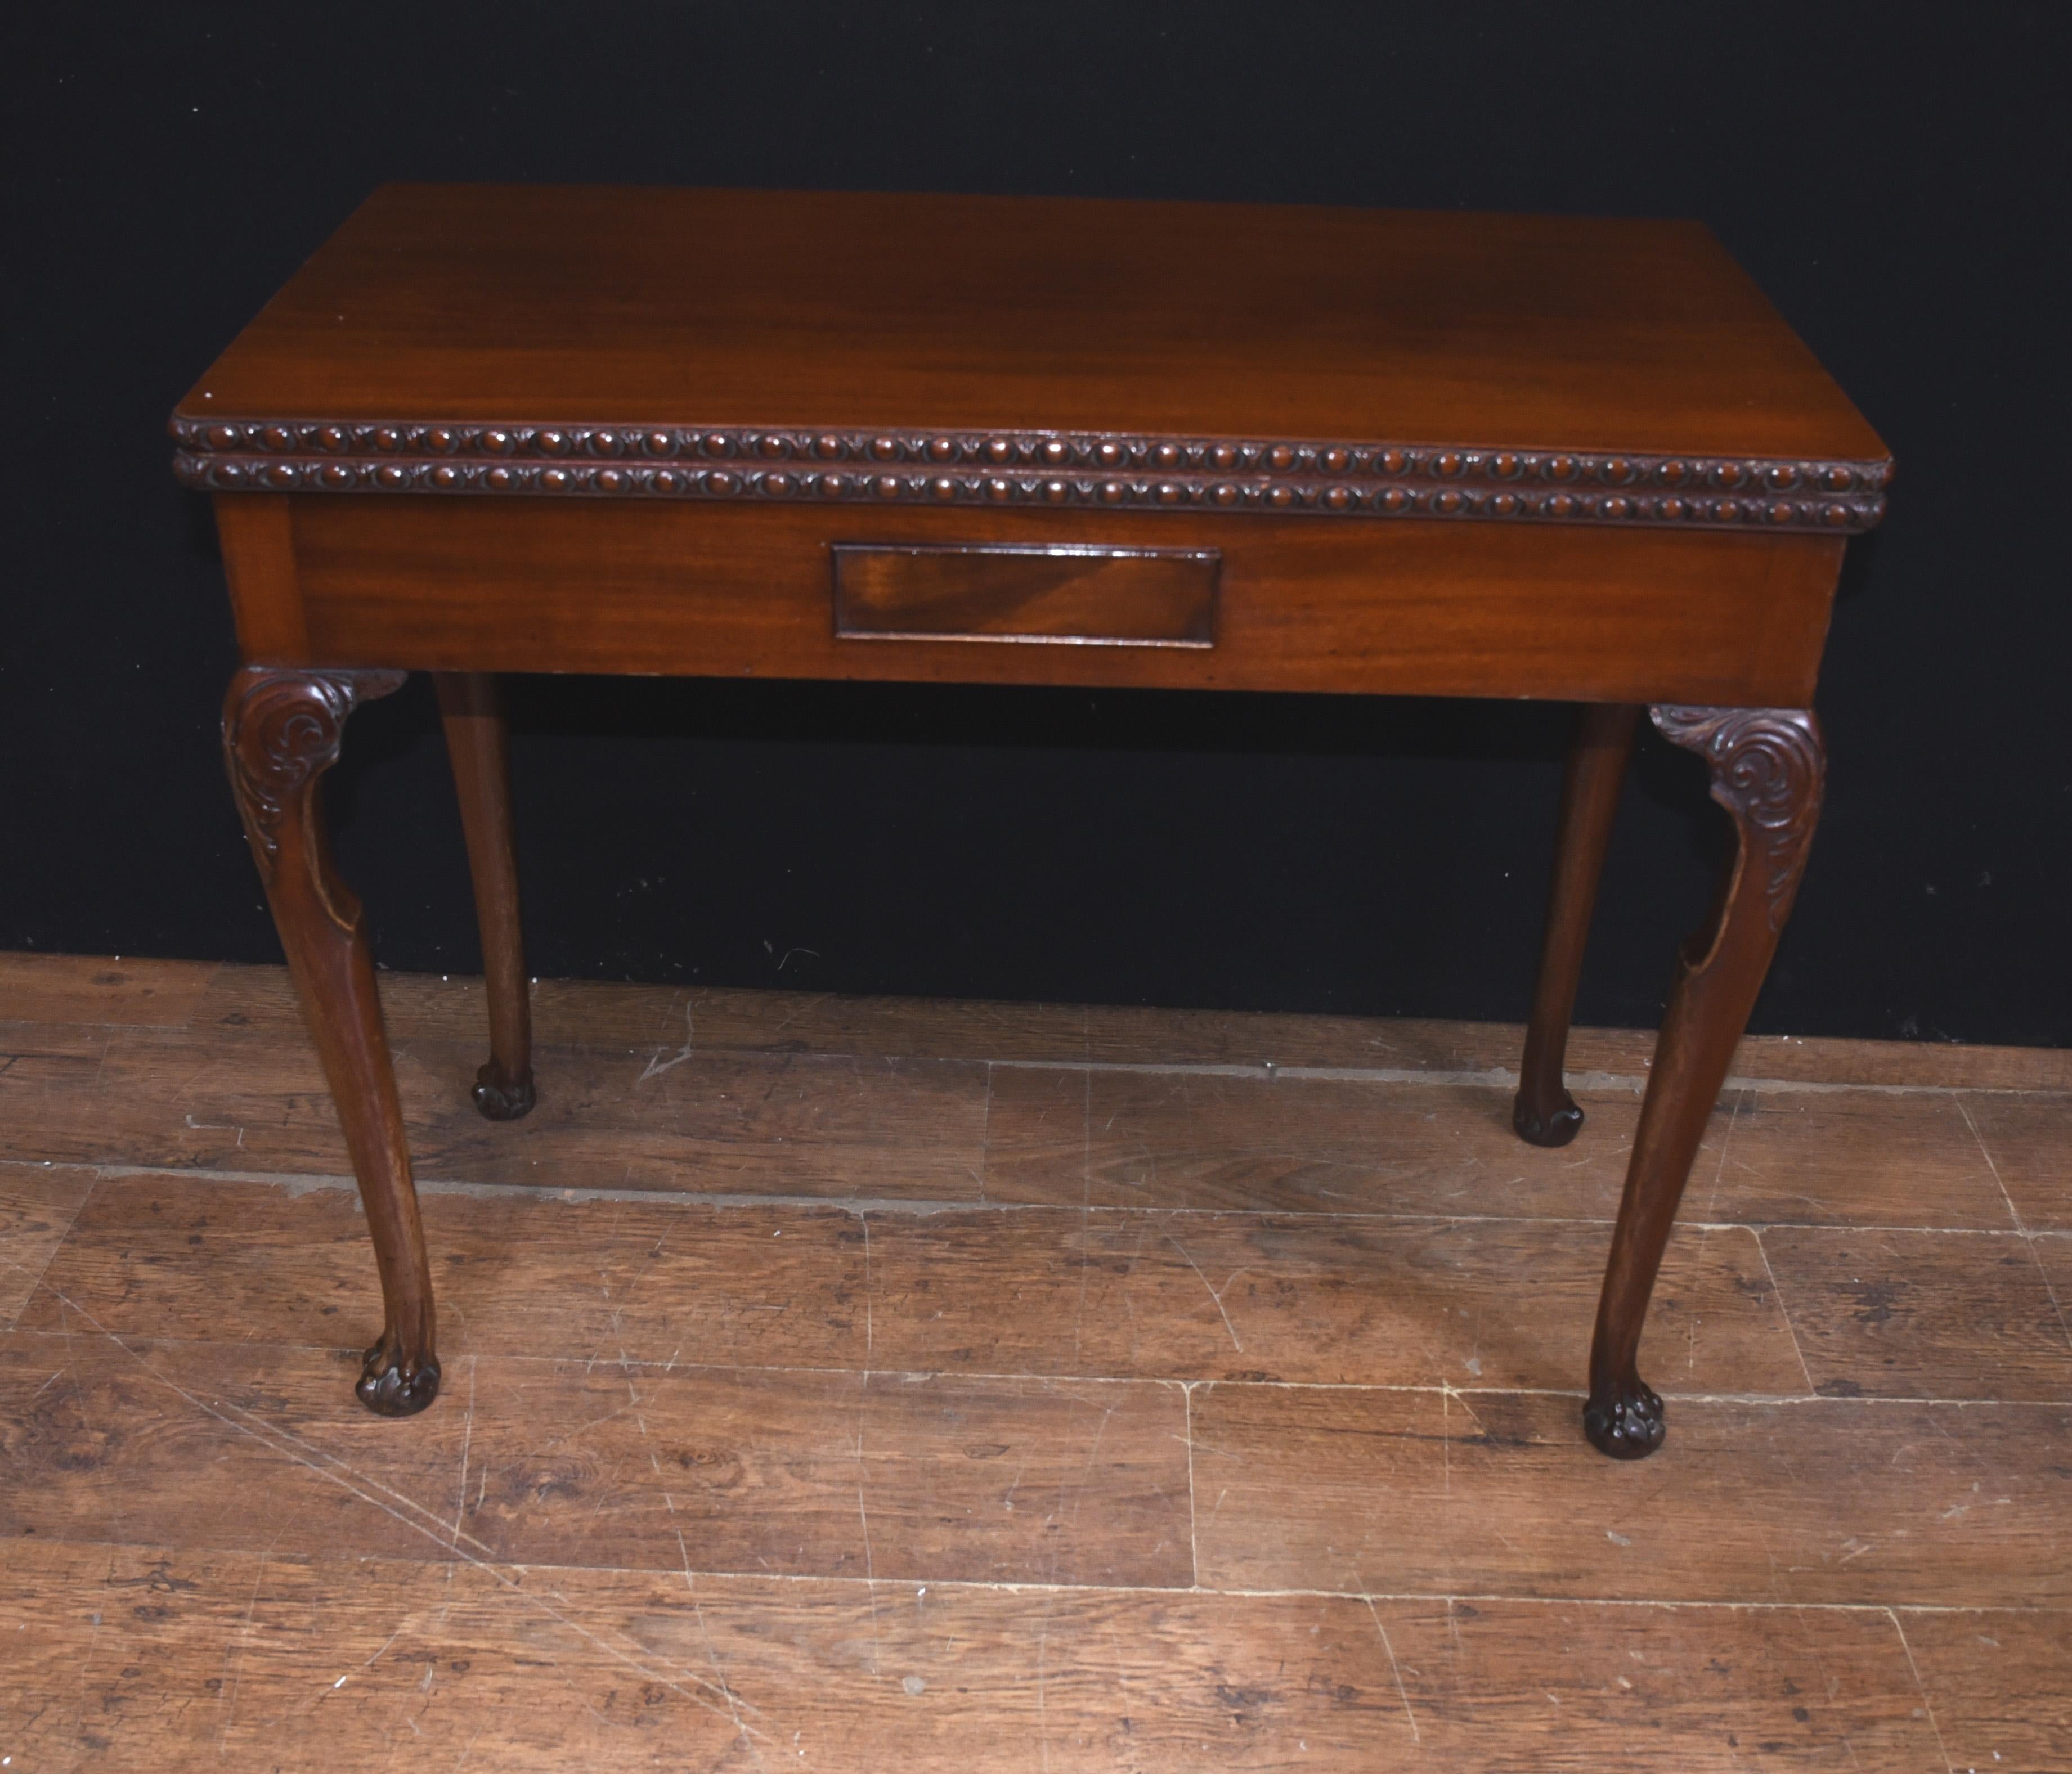 - Georgian style card table Circa 1880 with cabriole legs terminating on ball and claw feet
- Felt base top with recesses for counters and a fine carved border
- Elegant table that can function decoratively as well as practically for all you poker